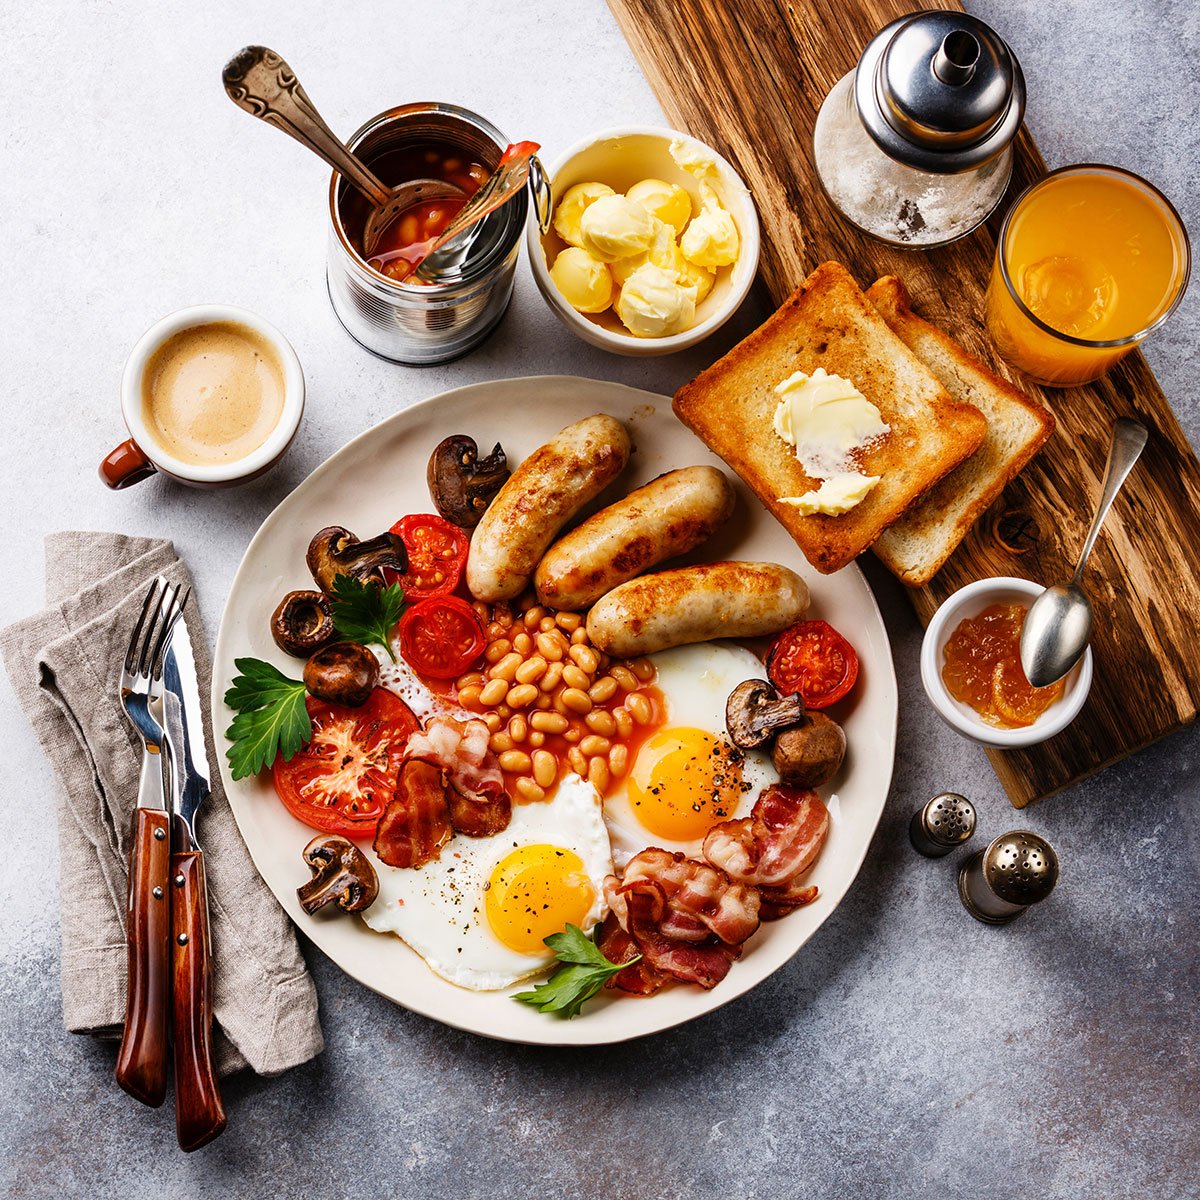 How to Cook English Breakfast